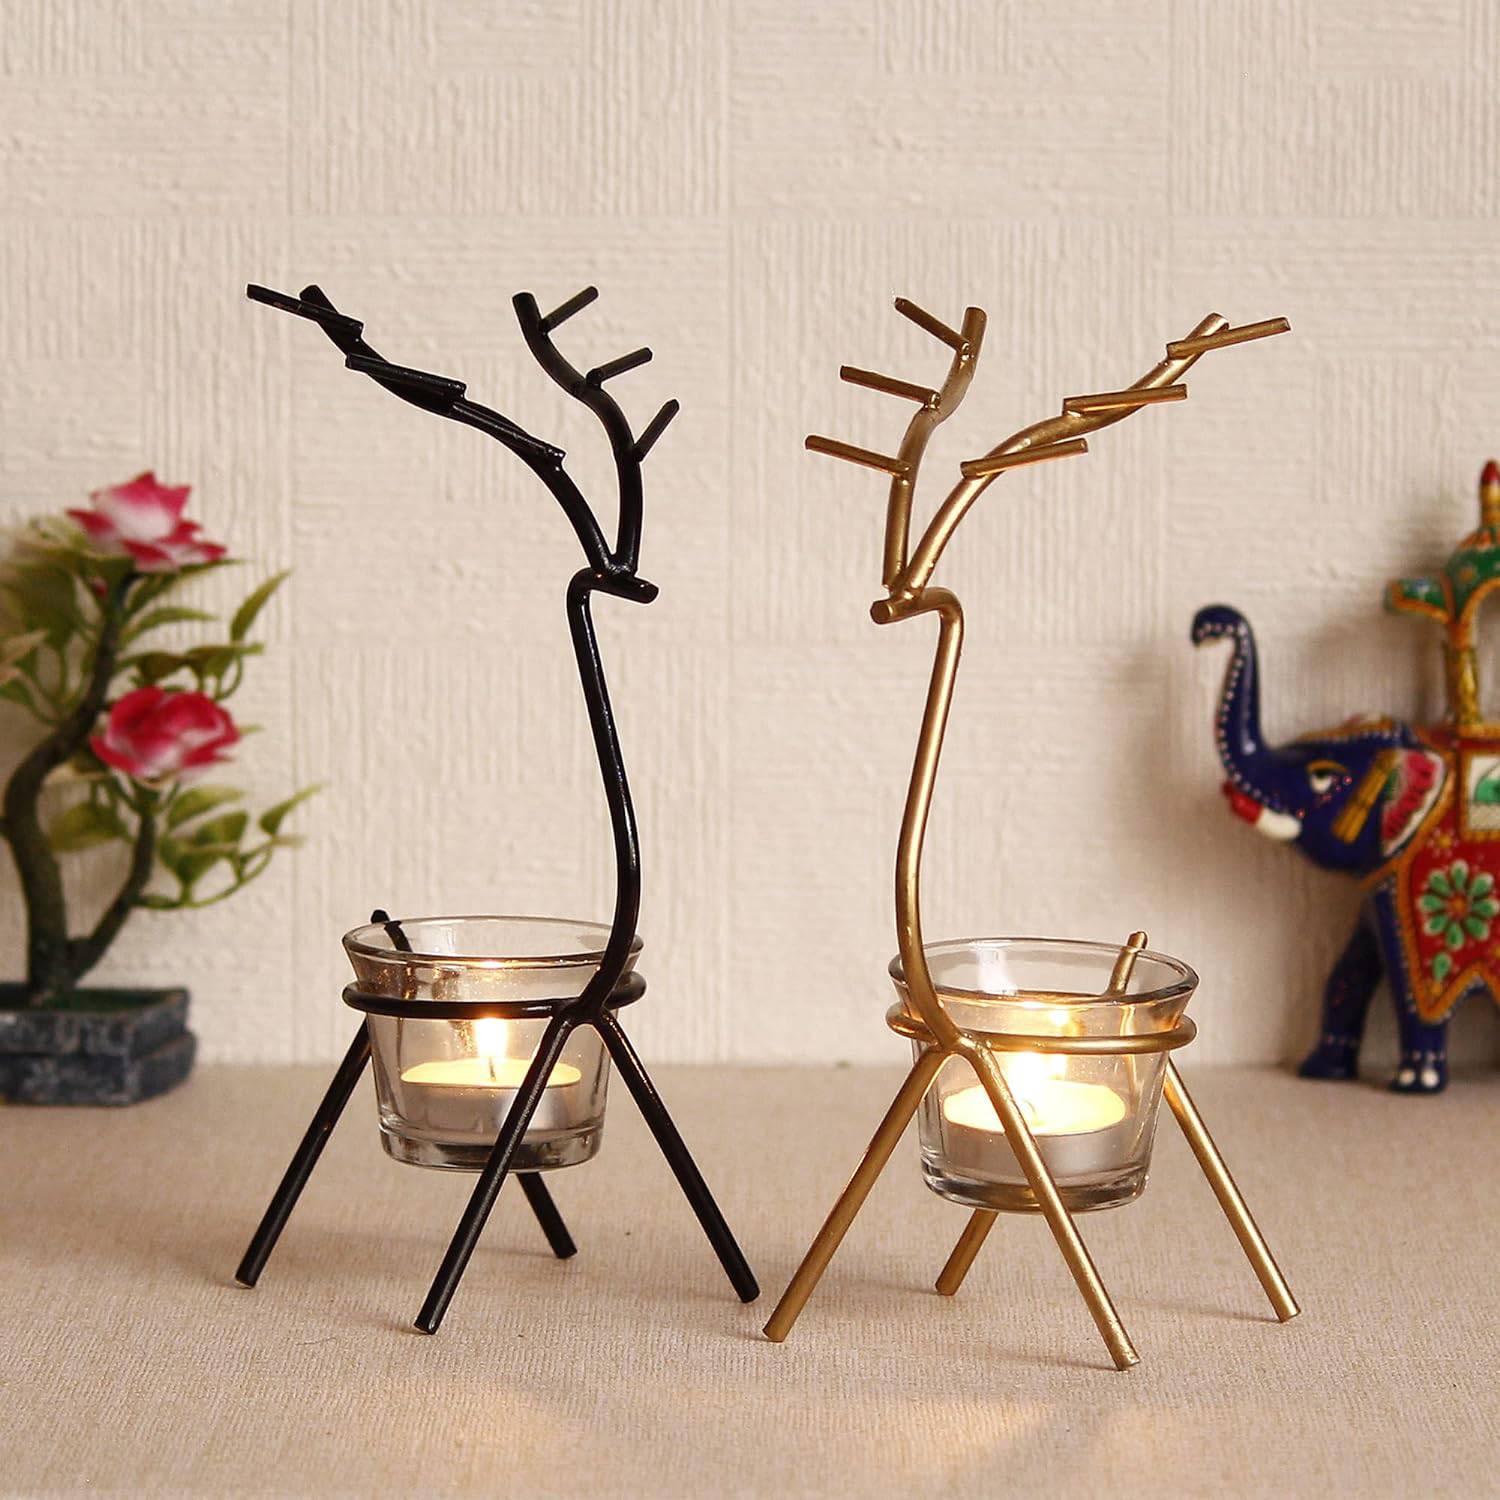 Black and Gold Set of 2 Deer Shape Decorative Handcrafted Metal Tea Light Candle Holders for Diwali Festival, Home Decor, Table Decoration, Gift - YuvaFlowers